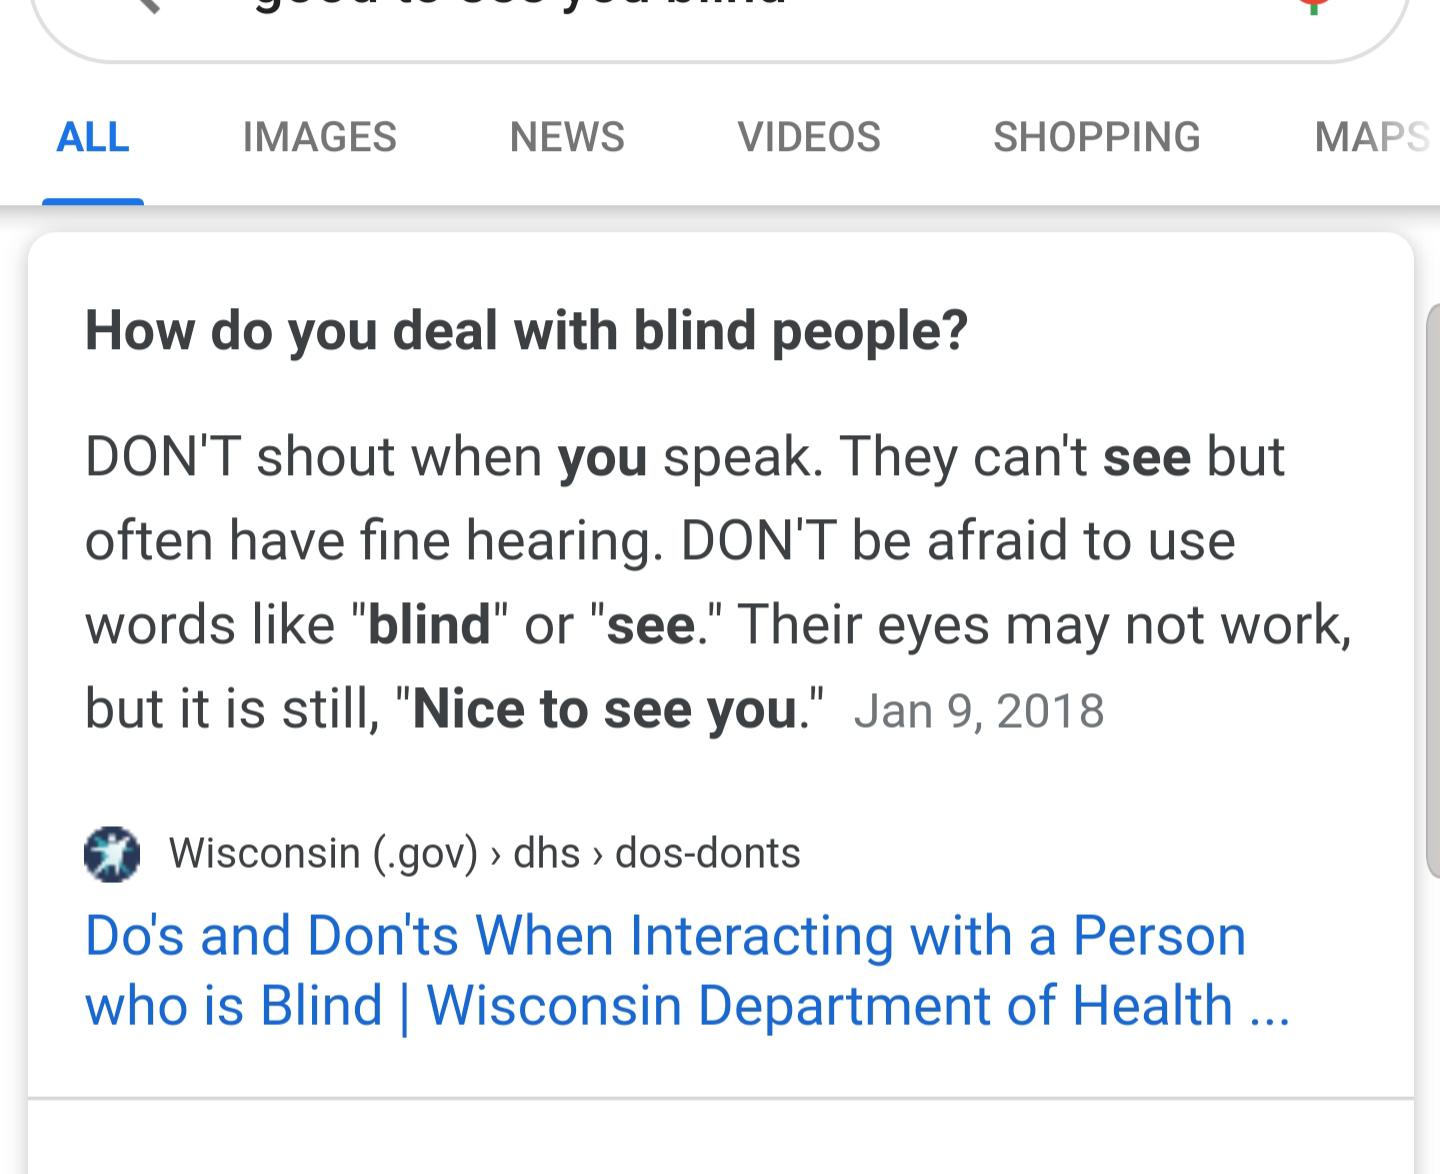 It's OK to interact with blind people.